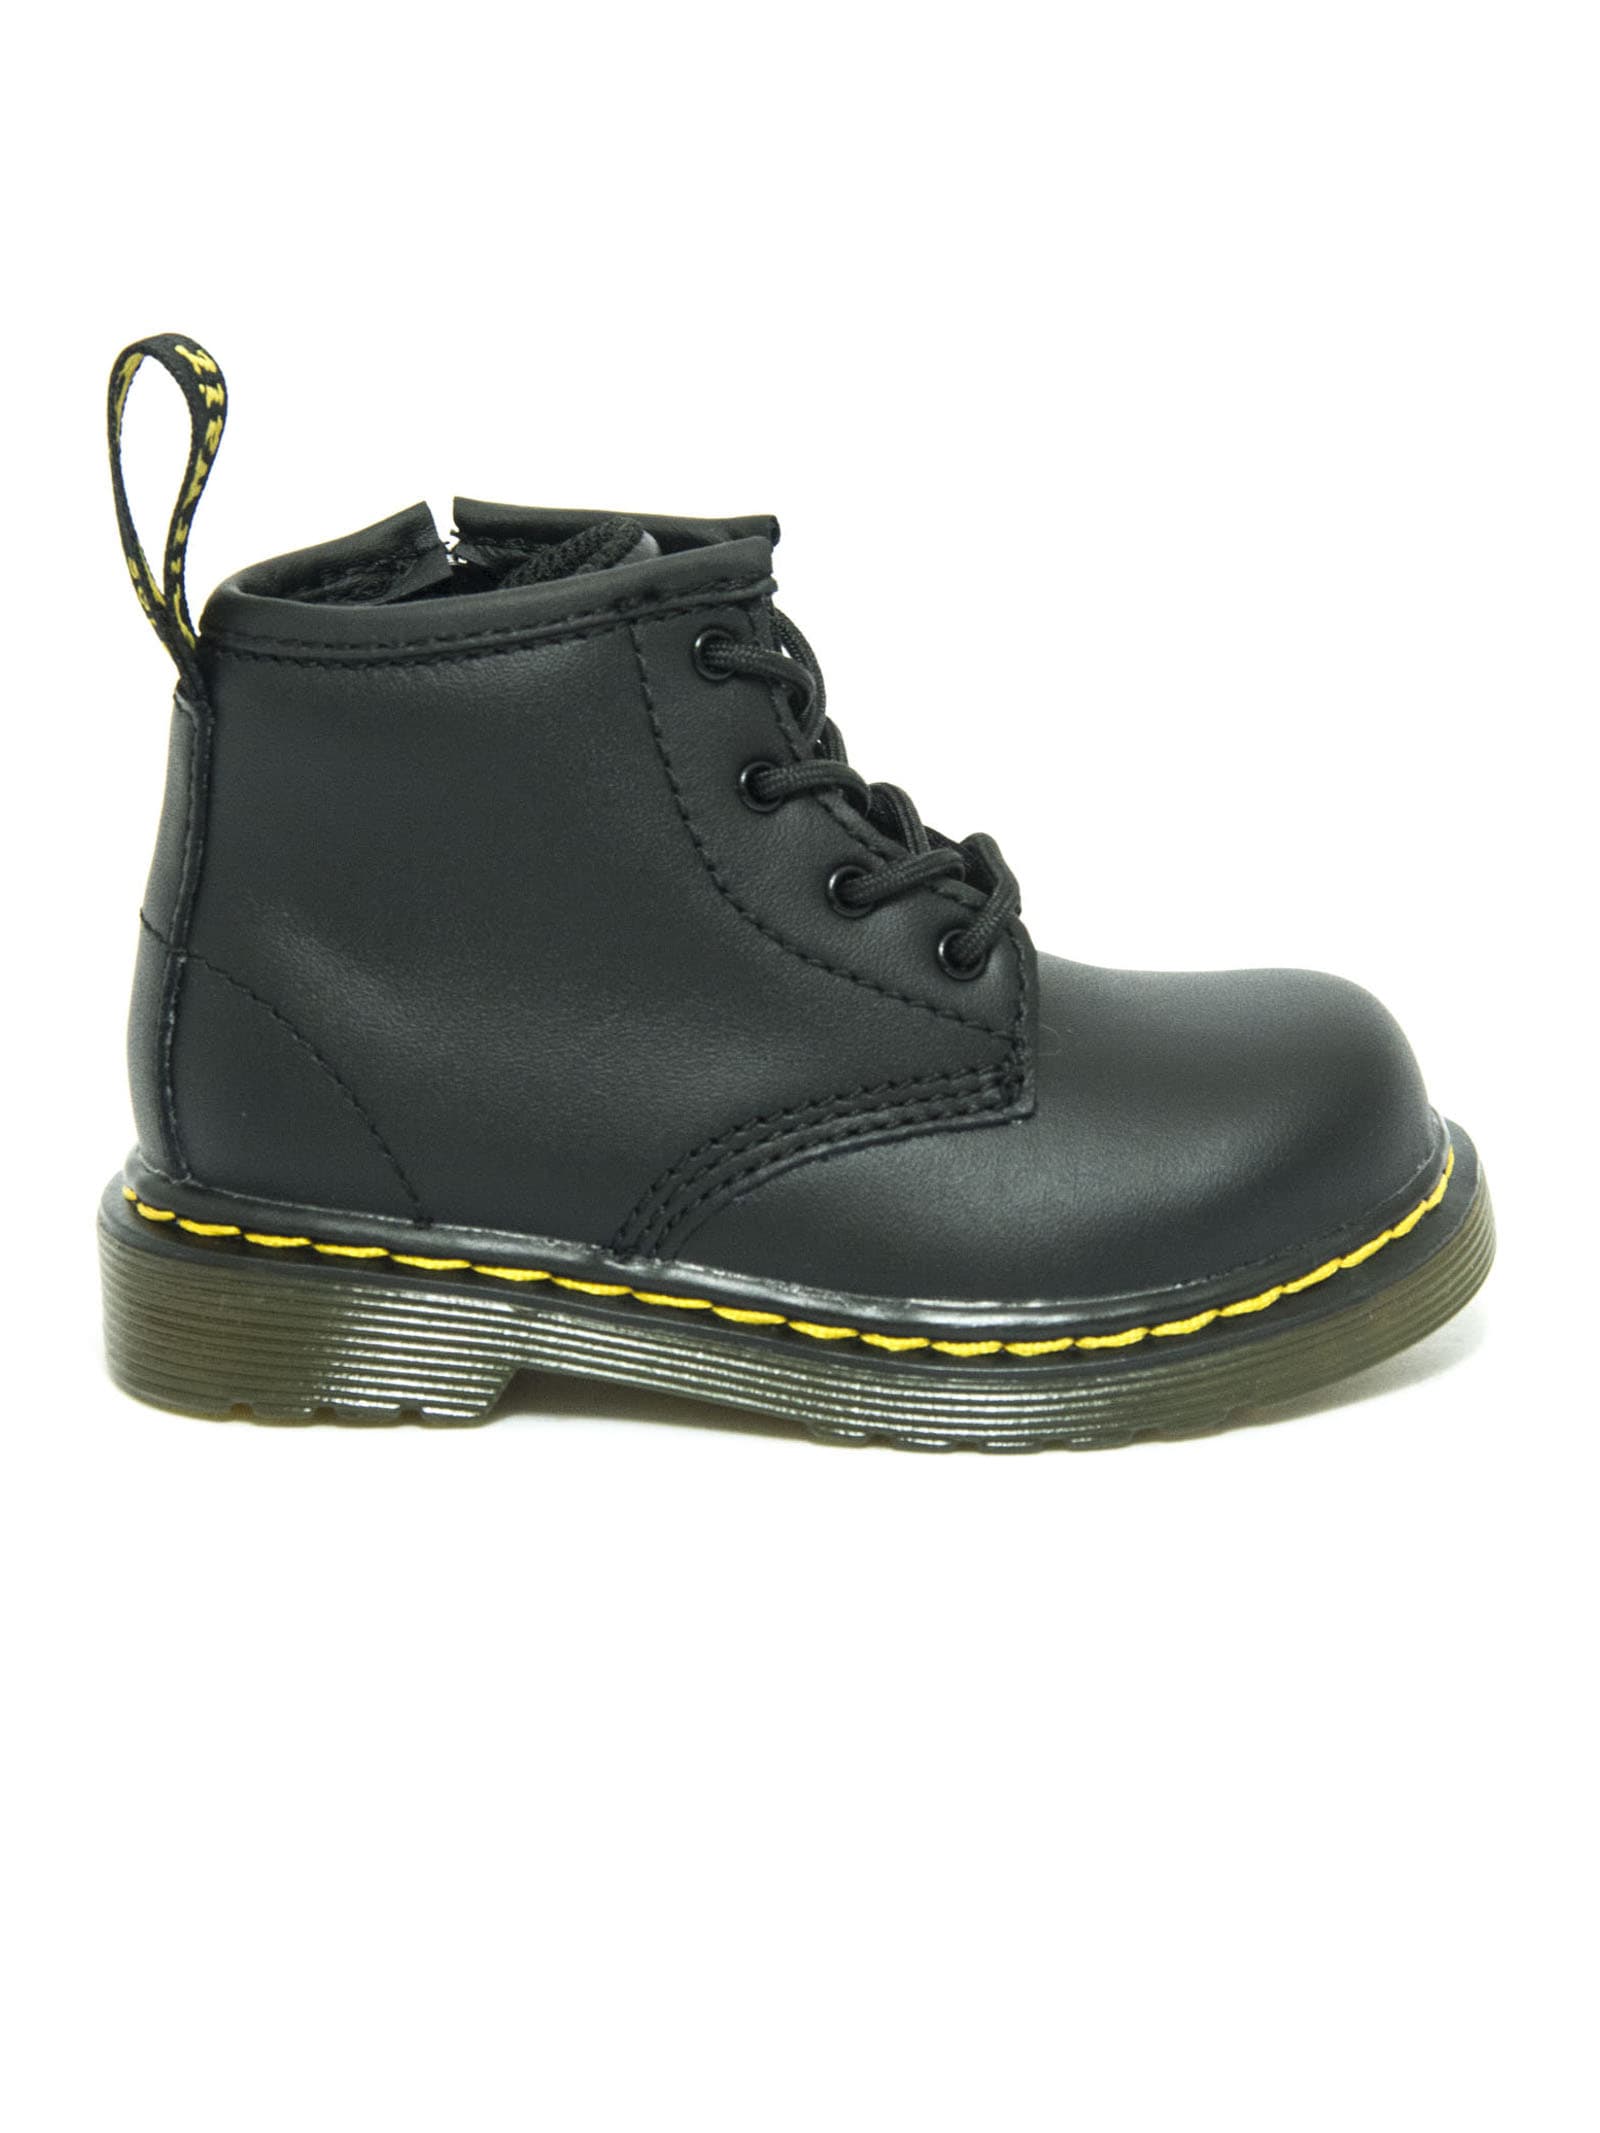 Dr. Martens 1460 Black Smooth Leather Boots